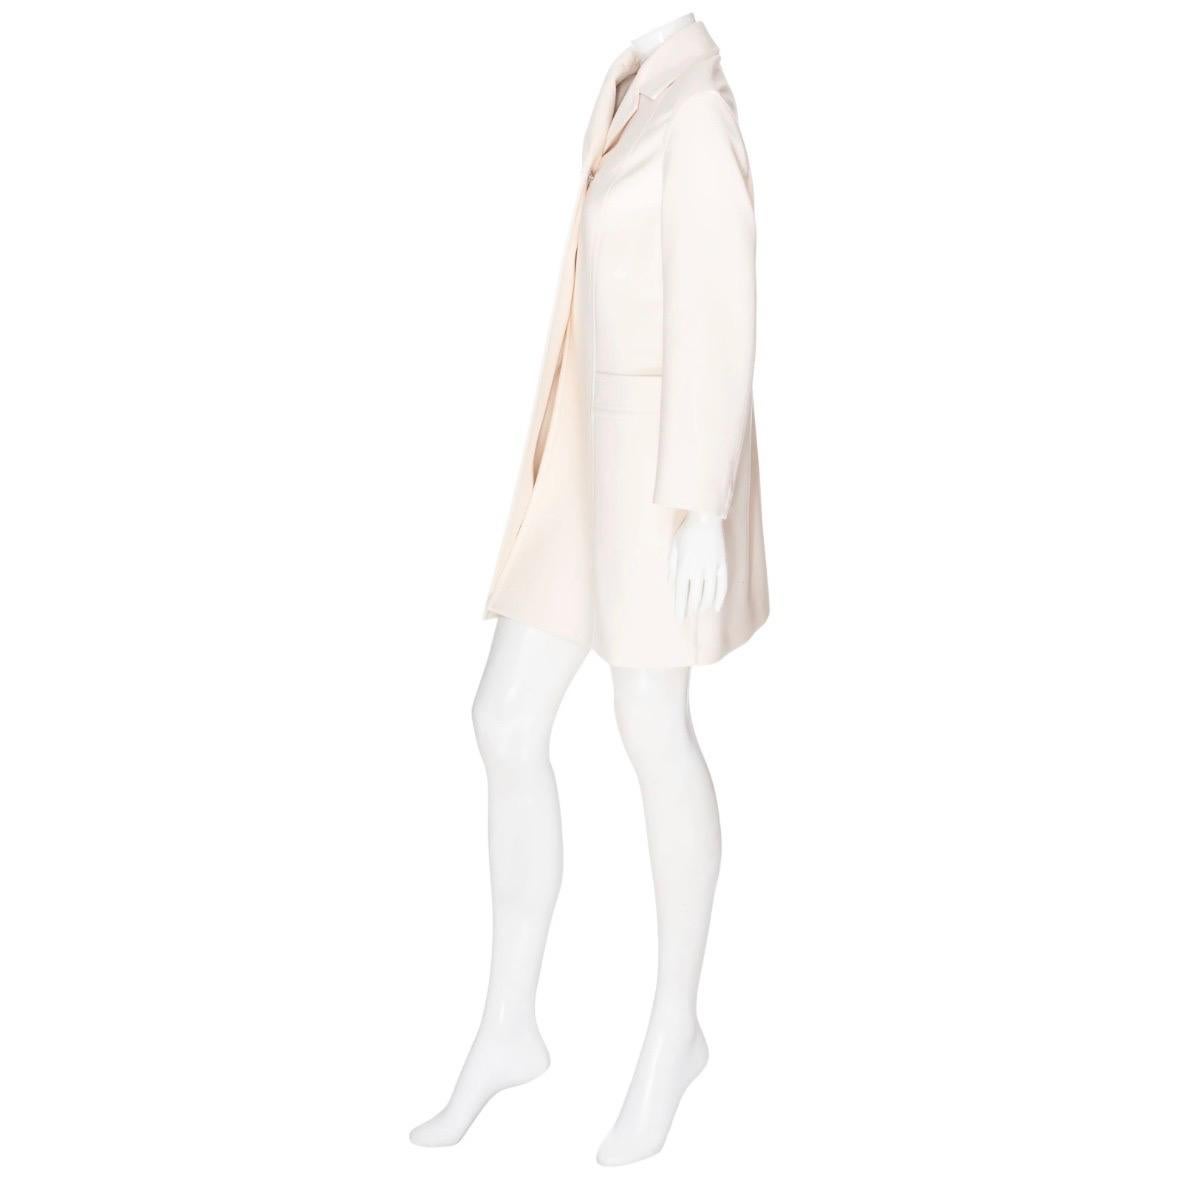 Hermès Ivory Wool Toggle Coat 

Ivory/Off White
Lightweight wool
Silver-tone hardware
Single toggle and grommet front closure
Notched collar
Patch pocket front
Jacquard lining
Short A-line silhouette
Above-the-knee length
Oversized fit
Made in